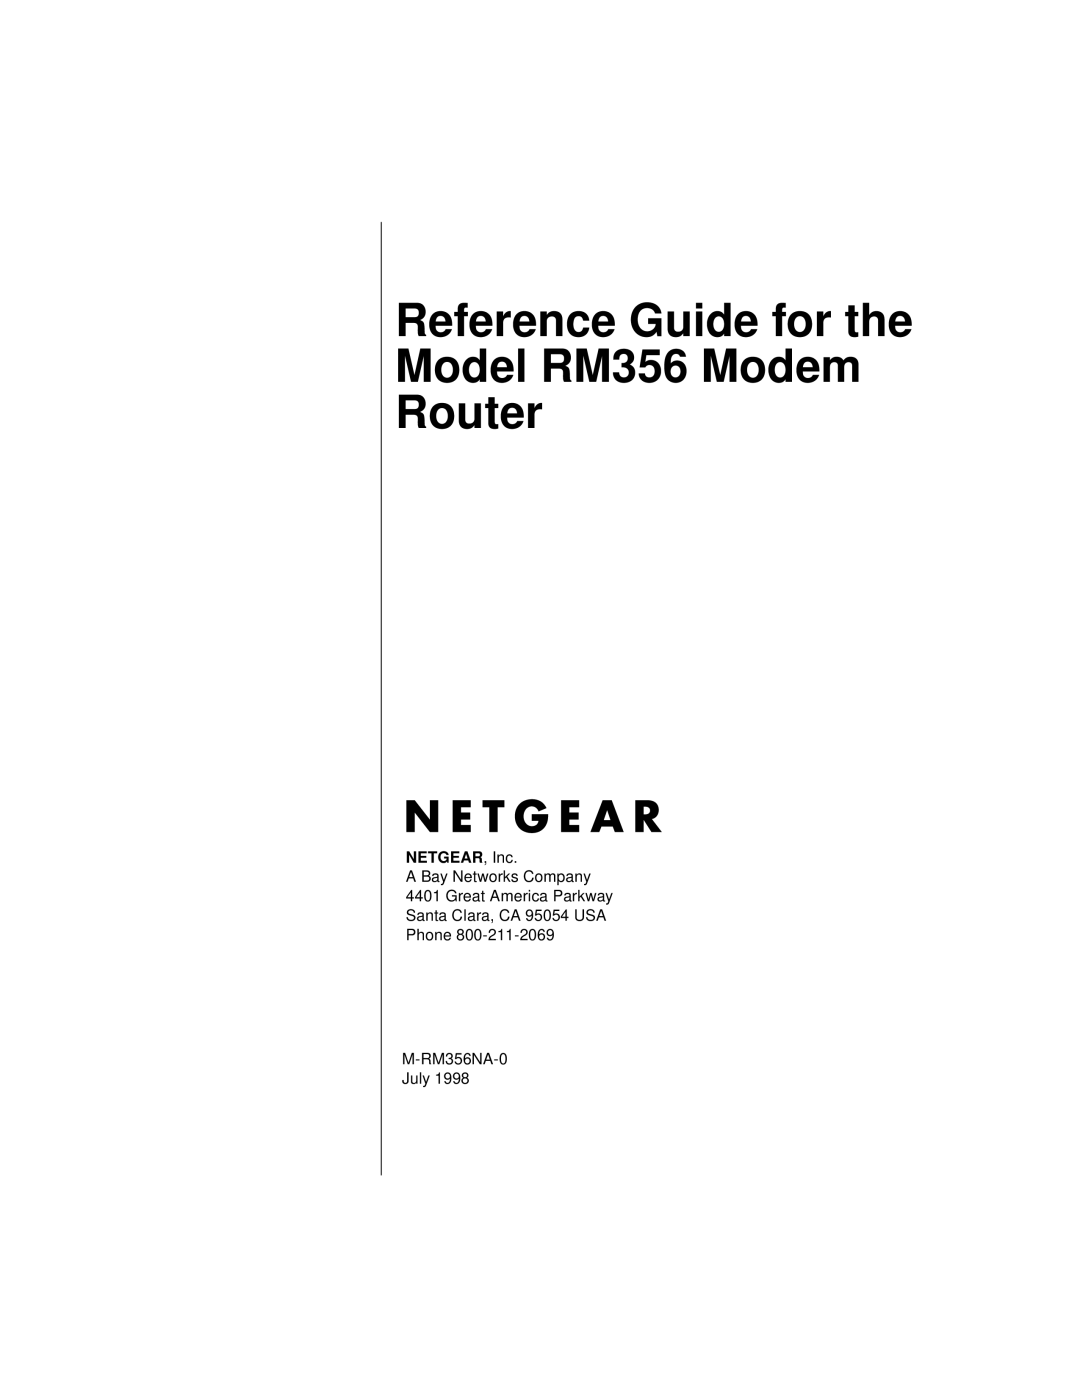 Bay Technical Associates manual Reference Guide for the Model RM356 Modem Router, NETGEAR, Inc 